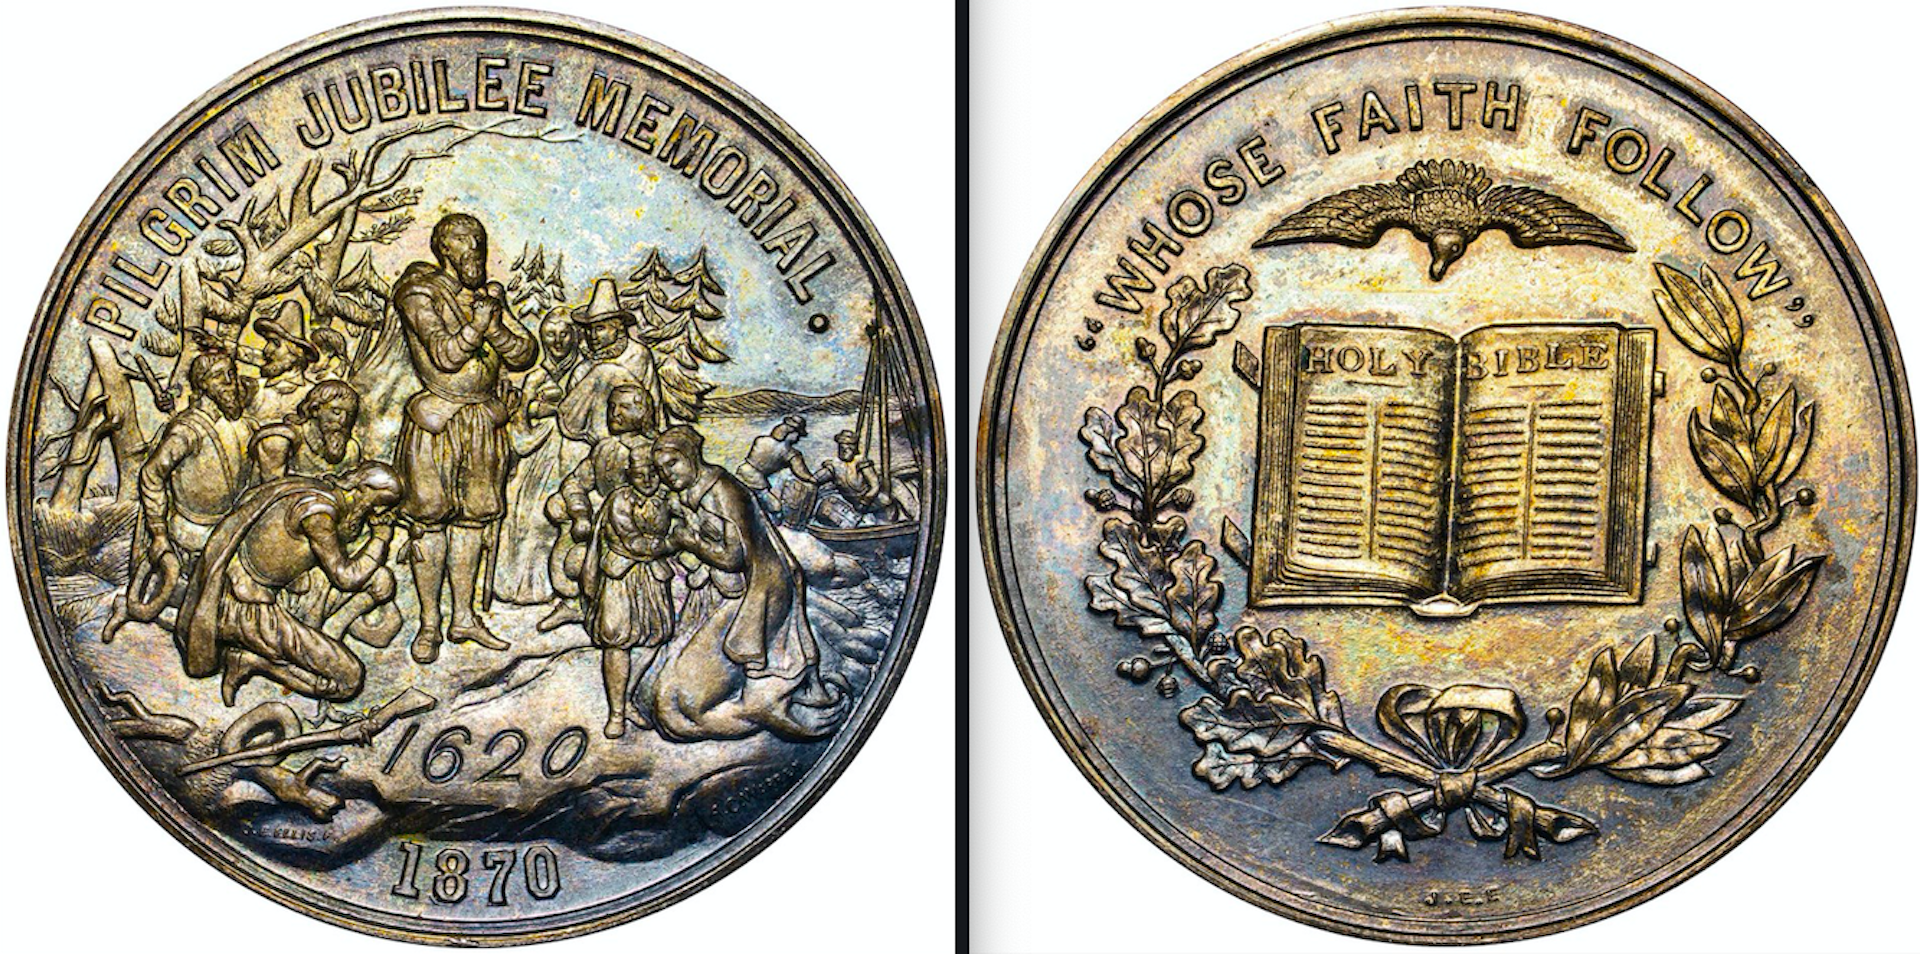 The front of the coin, which features praying Pilgrims reads, 'Pilgrim Jubilee Memorial,' while the back reads, 'Whose faith follow' above the Bible.